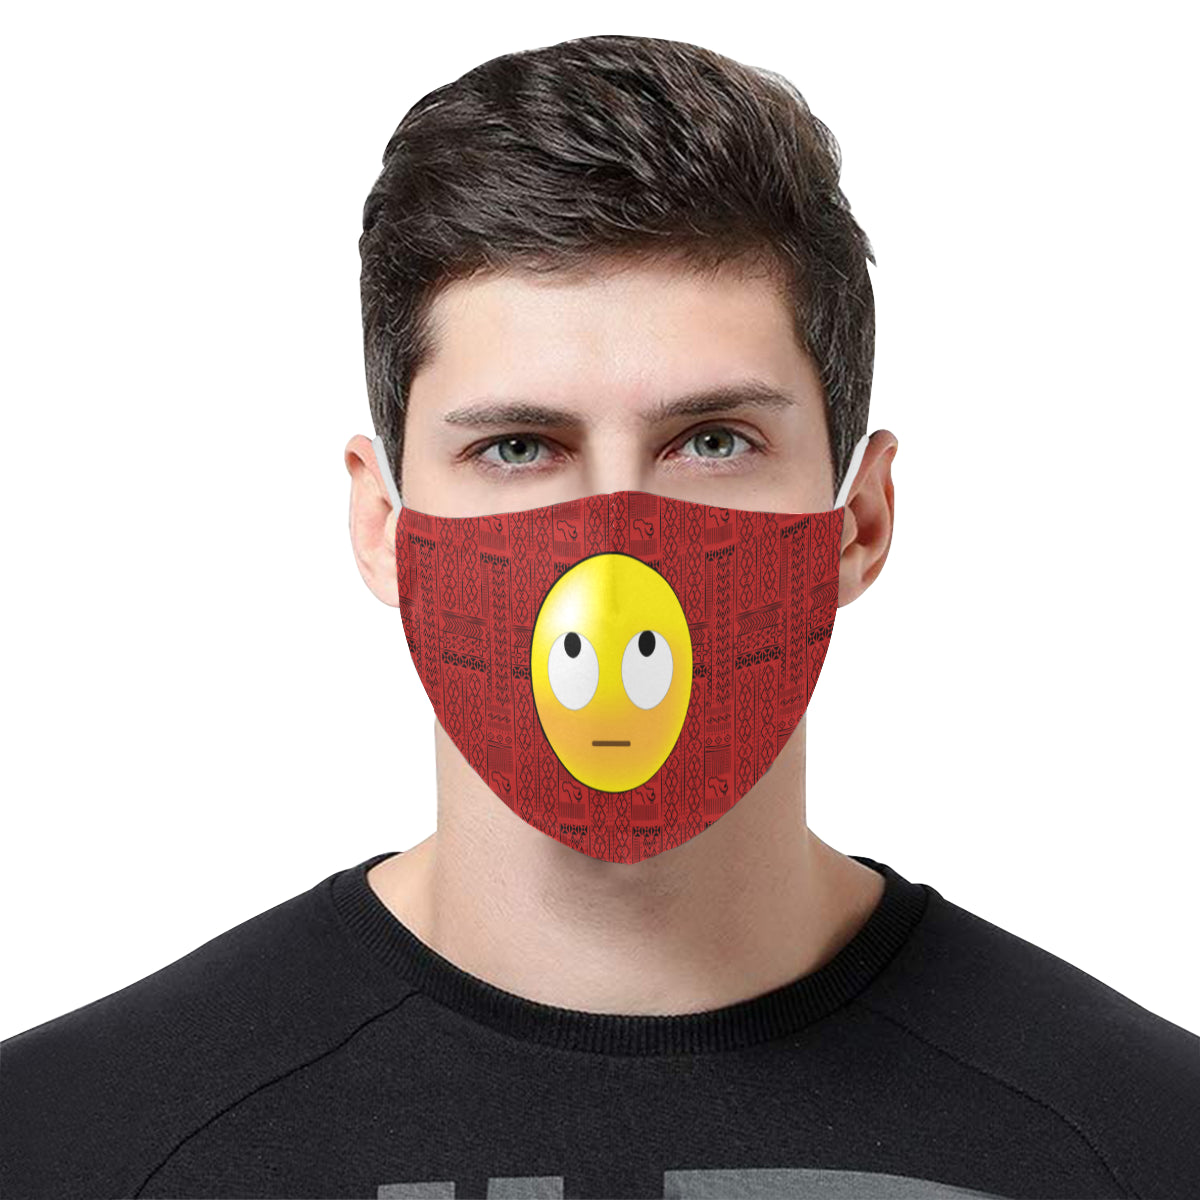 Yeah right! Tribal Print Emoji Cotton Fabric Face Mask with Filter Slot and Adjustable Strap - Non-medical use (2 Filters Included)